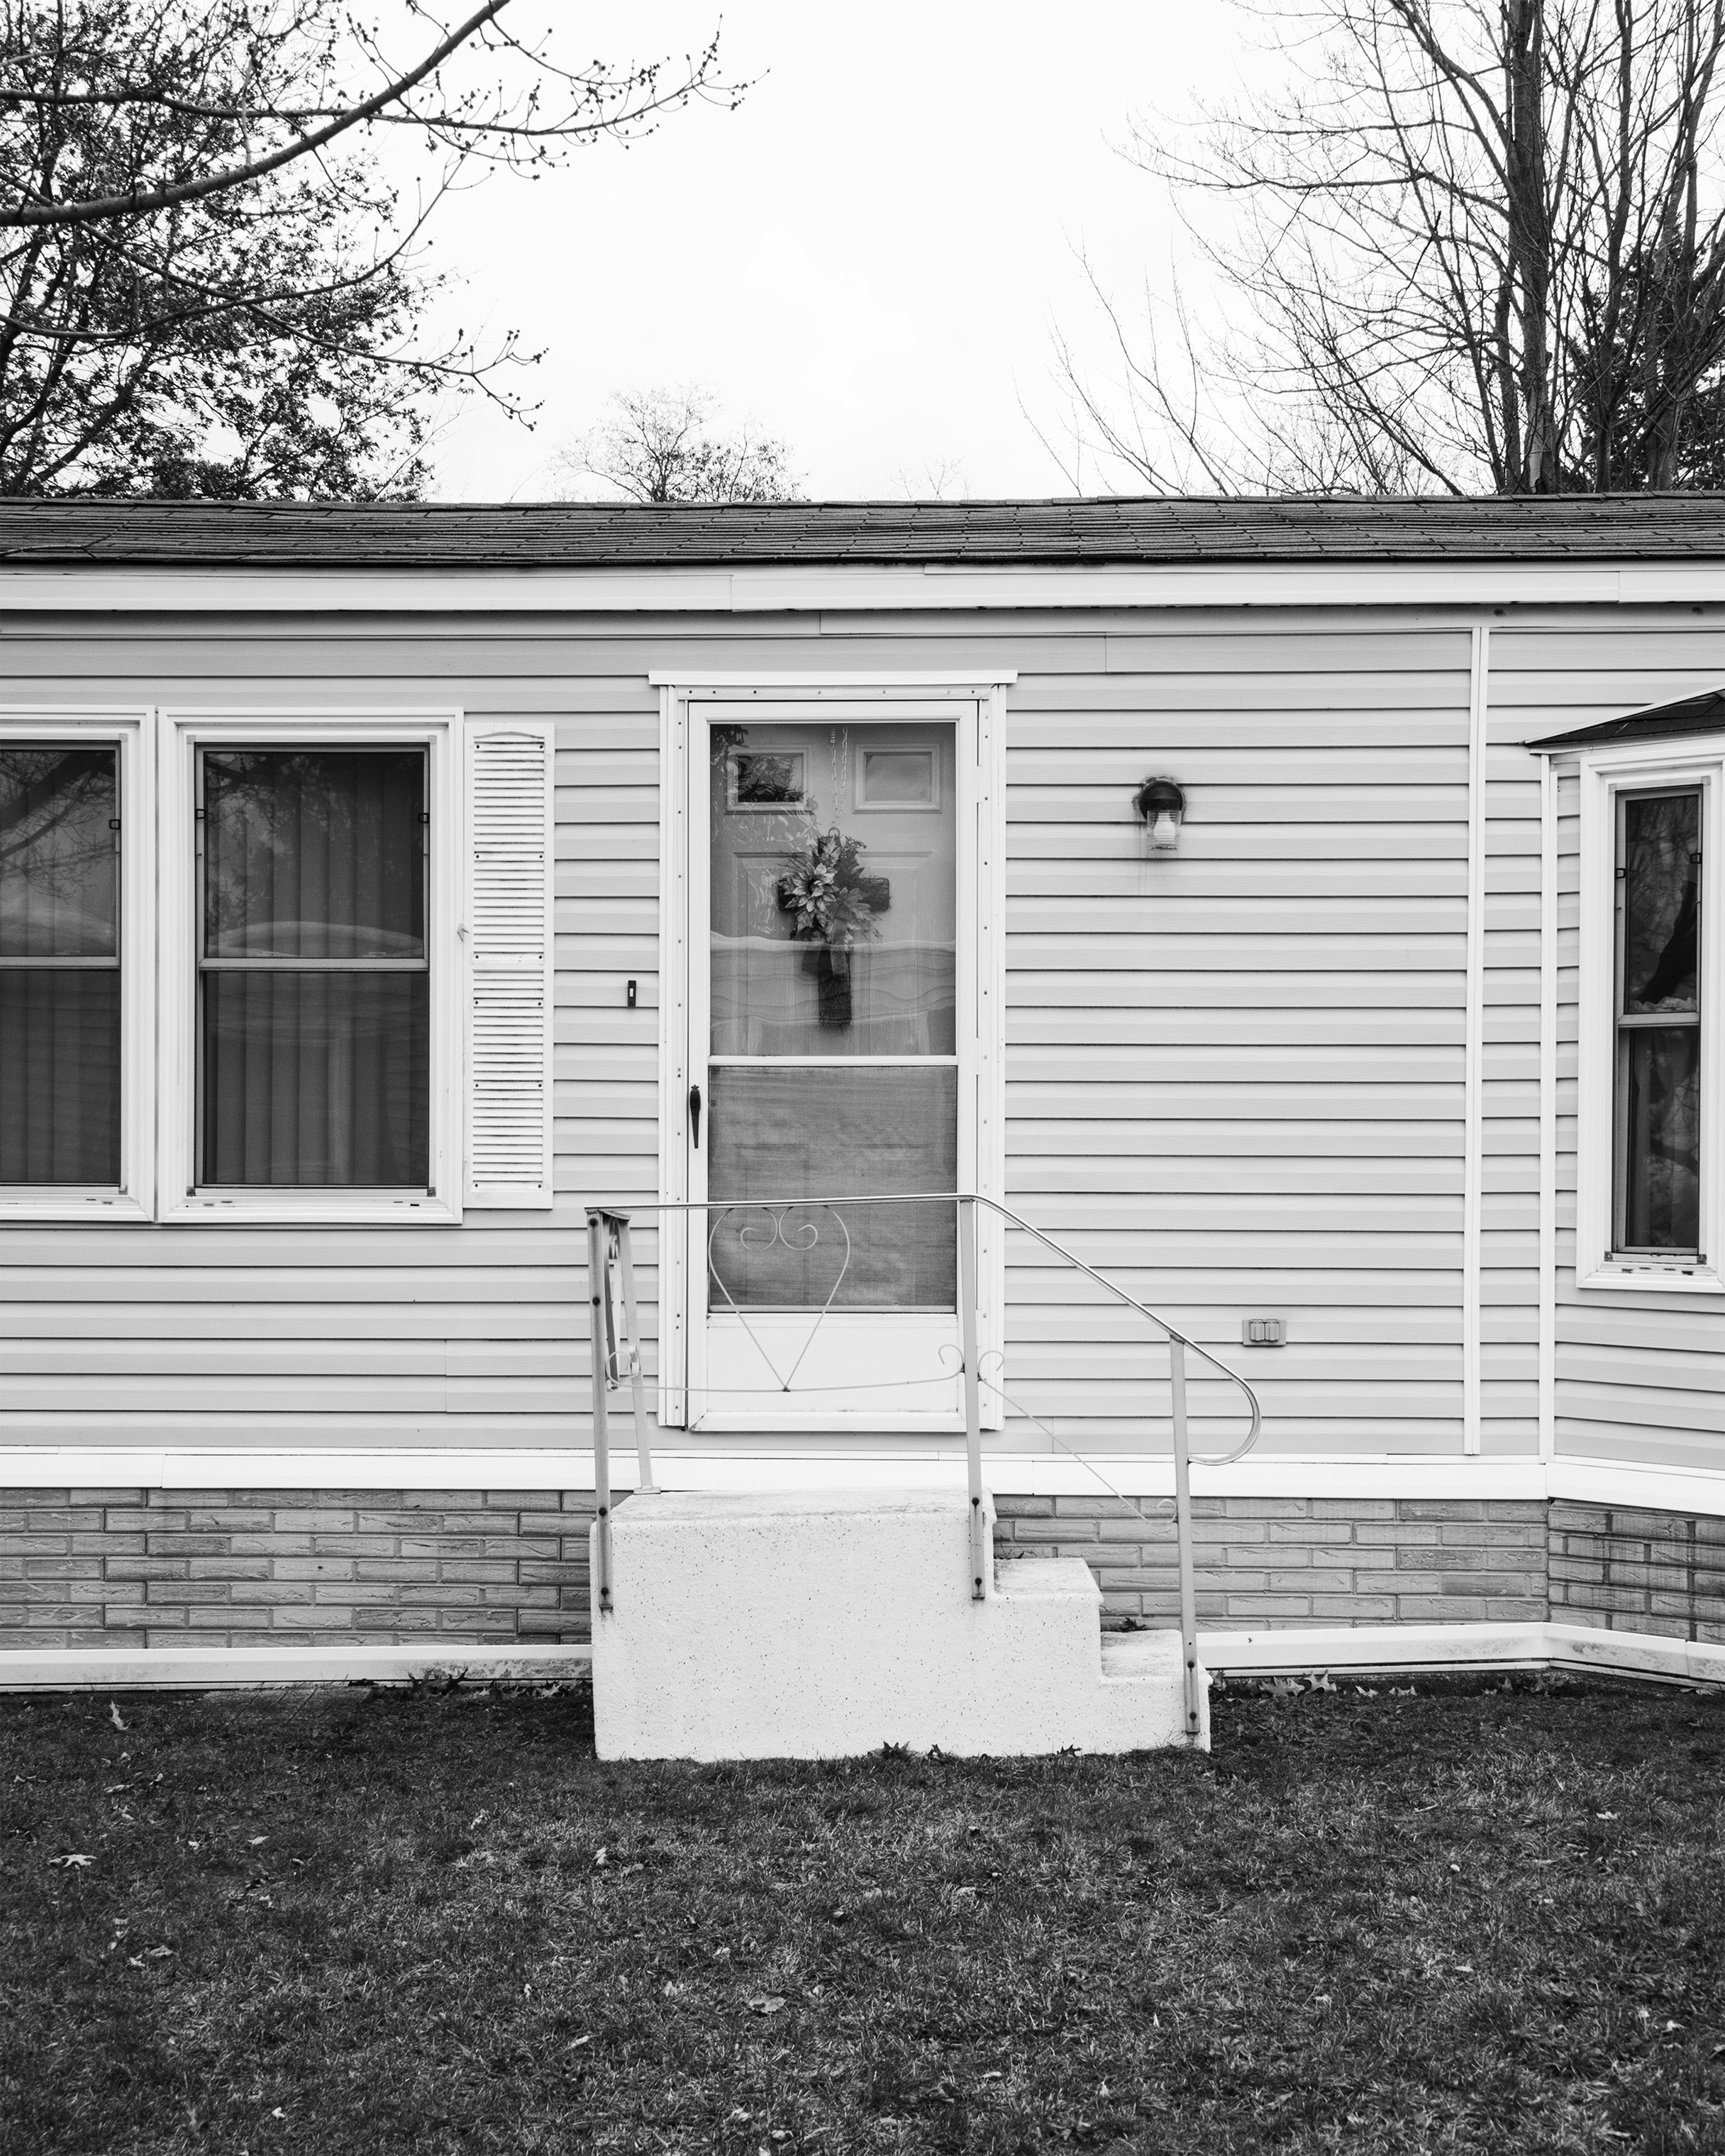 An exterior of a home in the Akron Manufactured Home Community (Shane Lavalette for TIME)